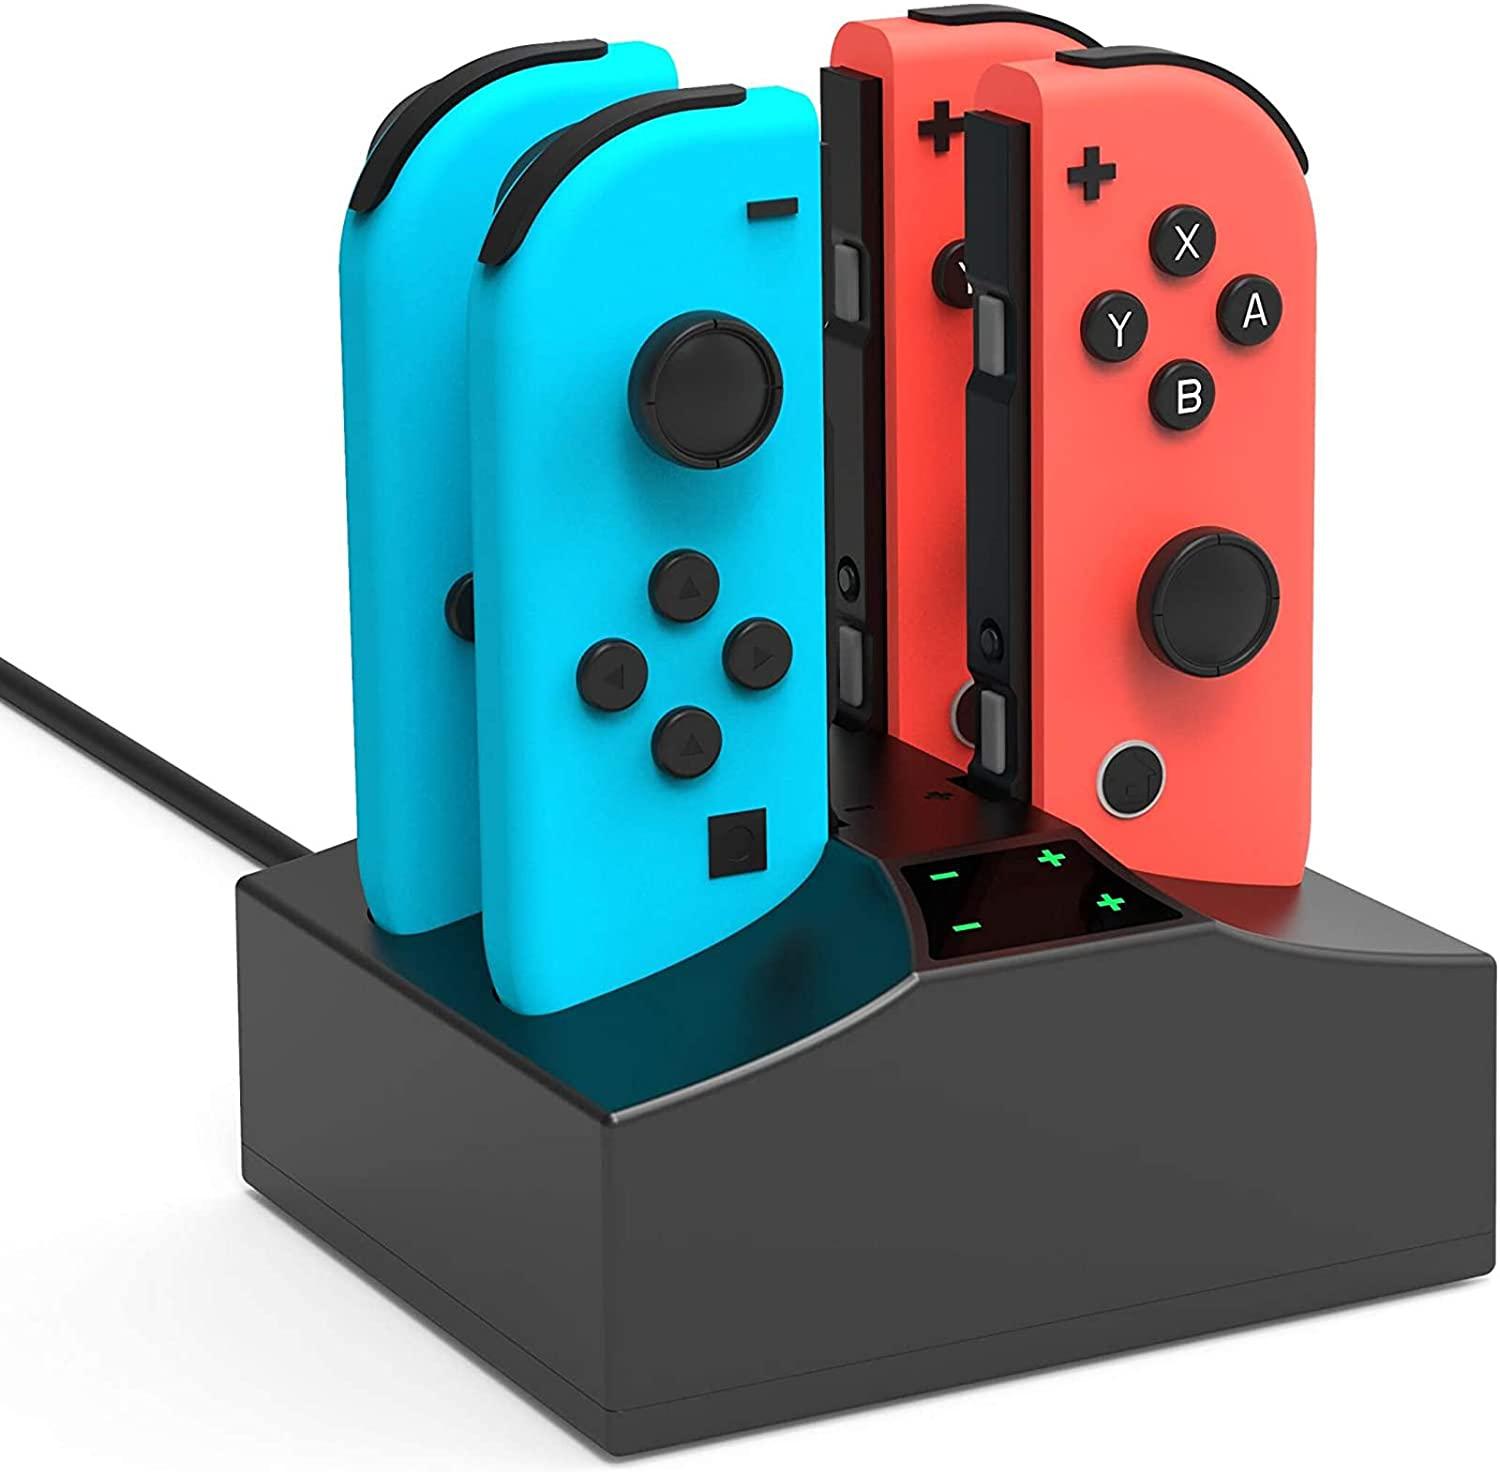 YCCSKY 4-in-1 Nintendo Switch Joycon Controller Charging Dock for $6.49